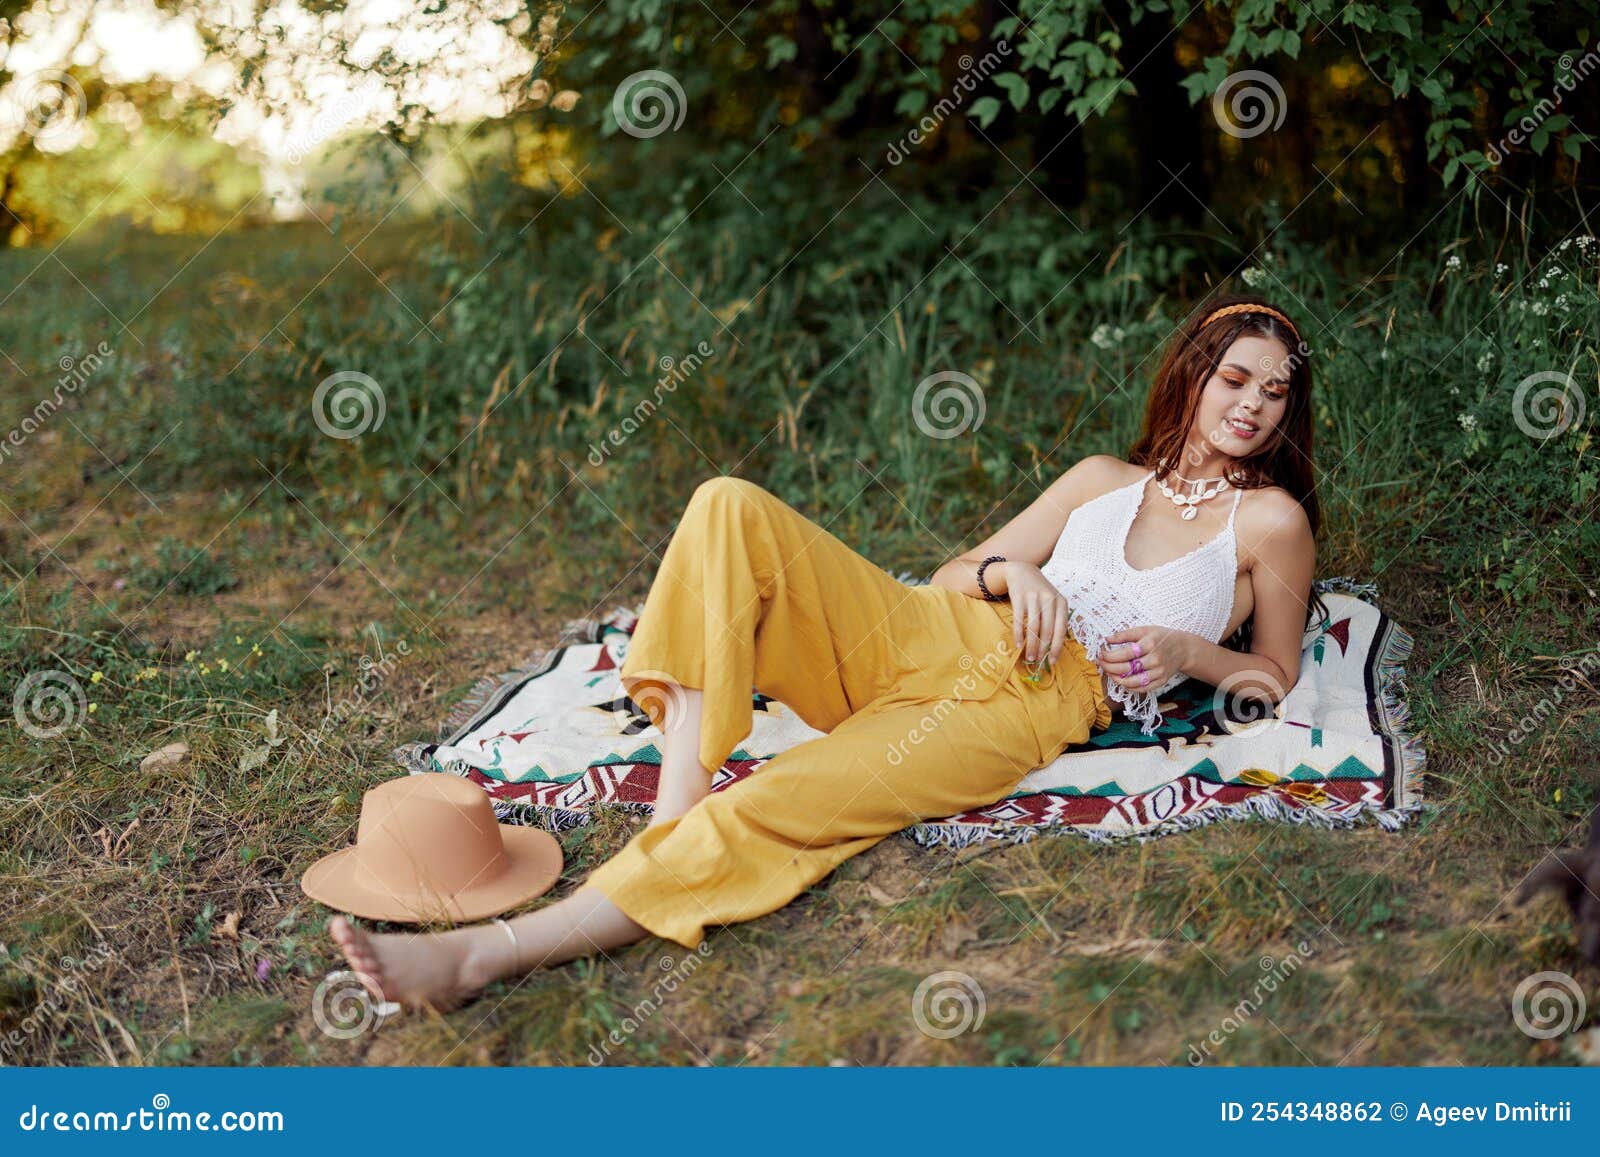 Young Beautiful Hippie Woman Lying on the Ground in Nature in the Fall ...